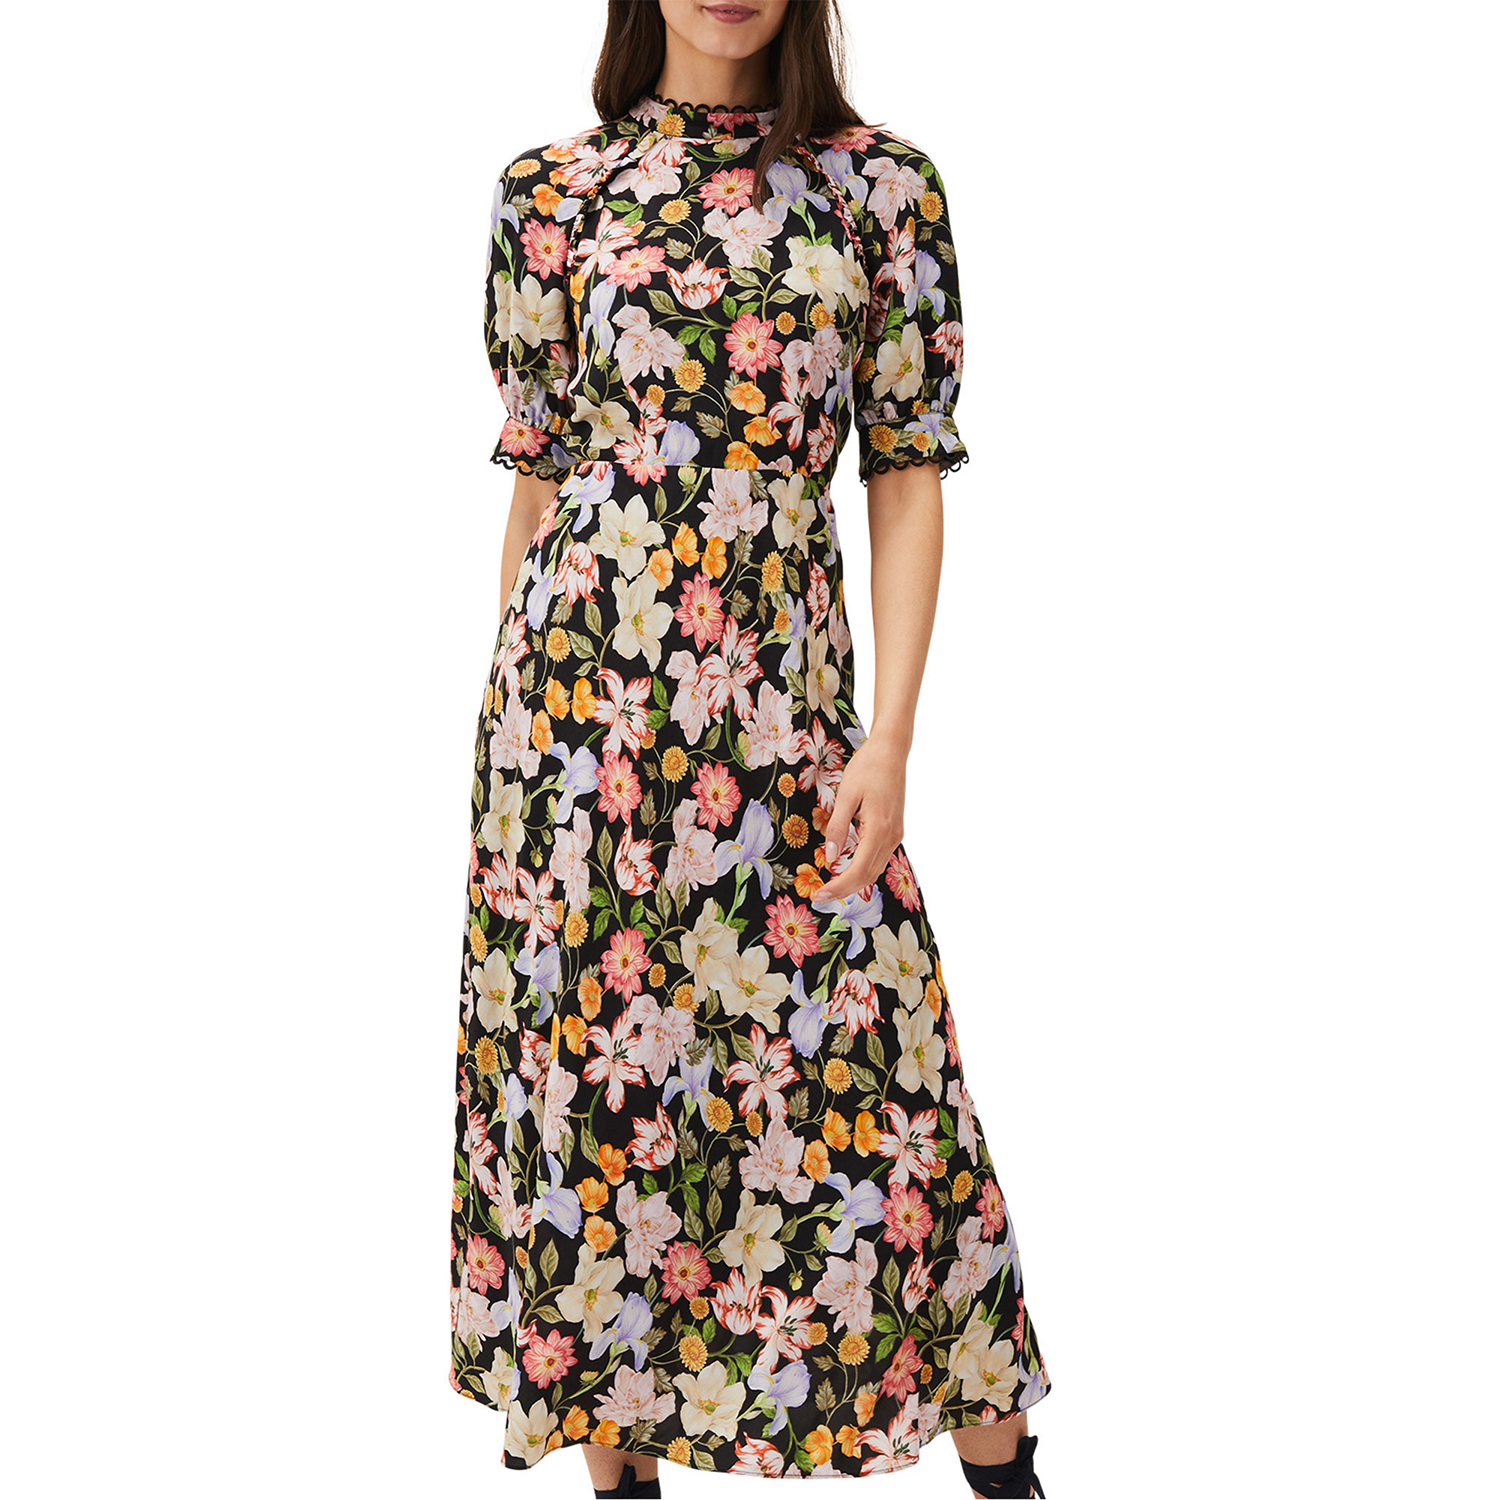 Penelope Puff Sleeve Floral Dress